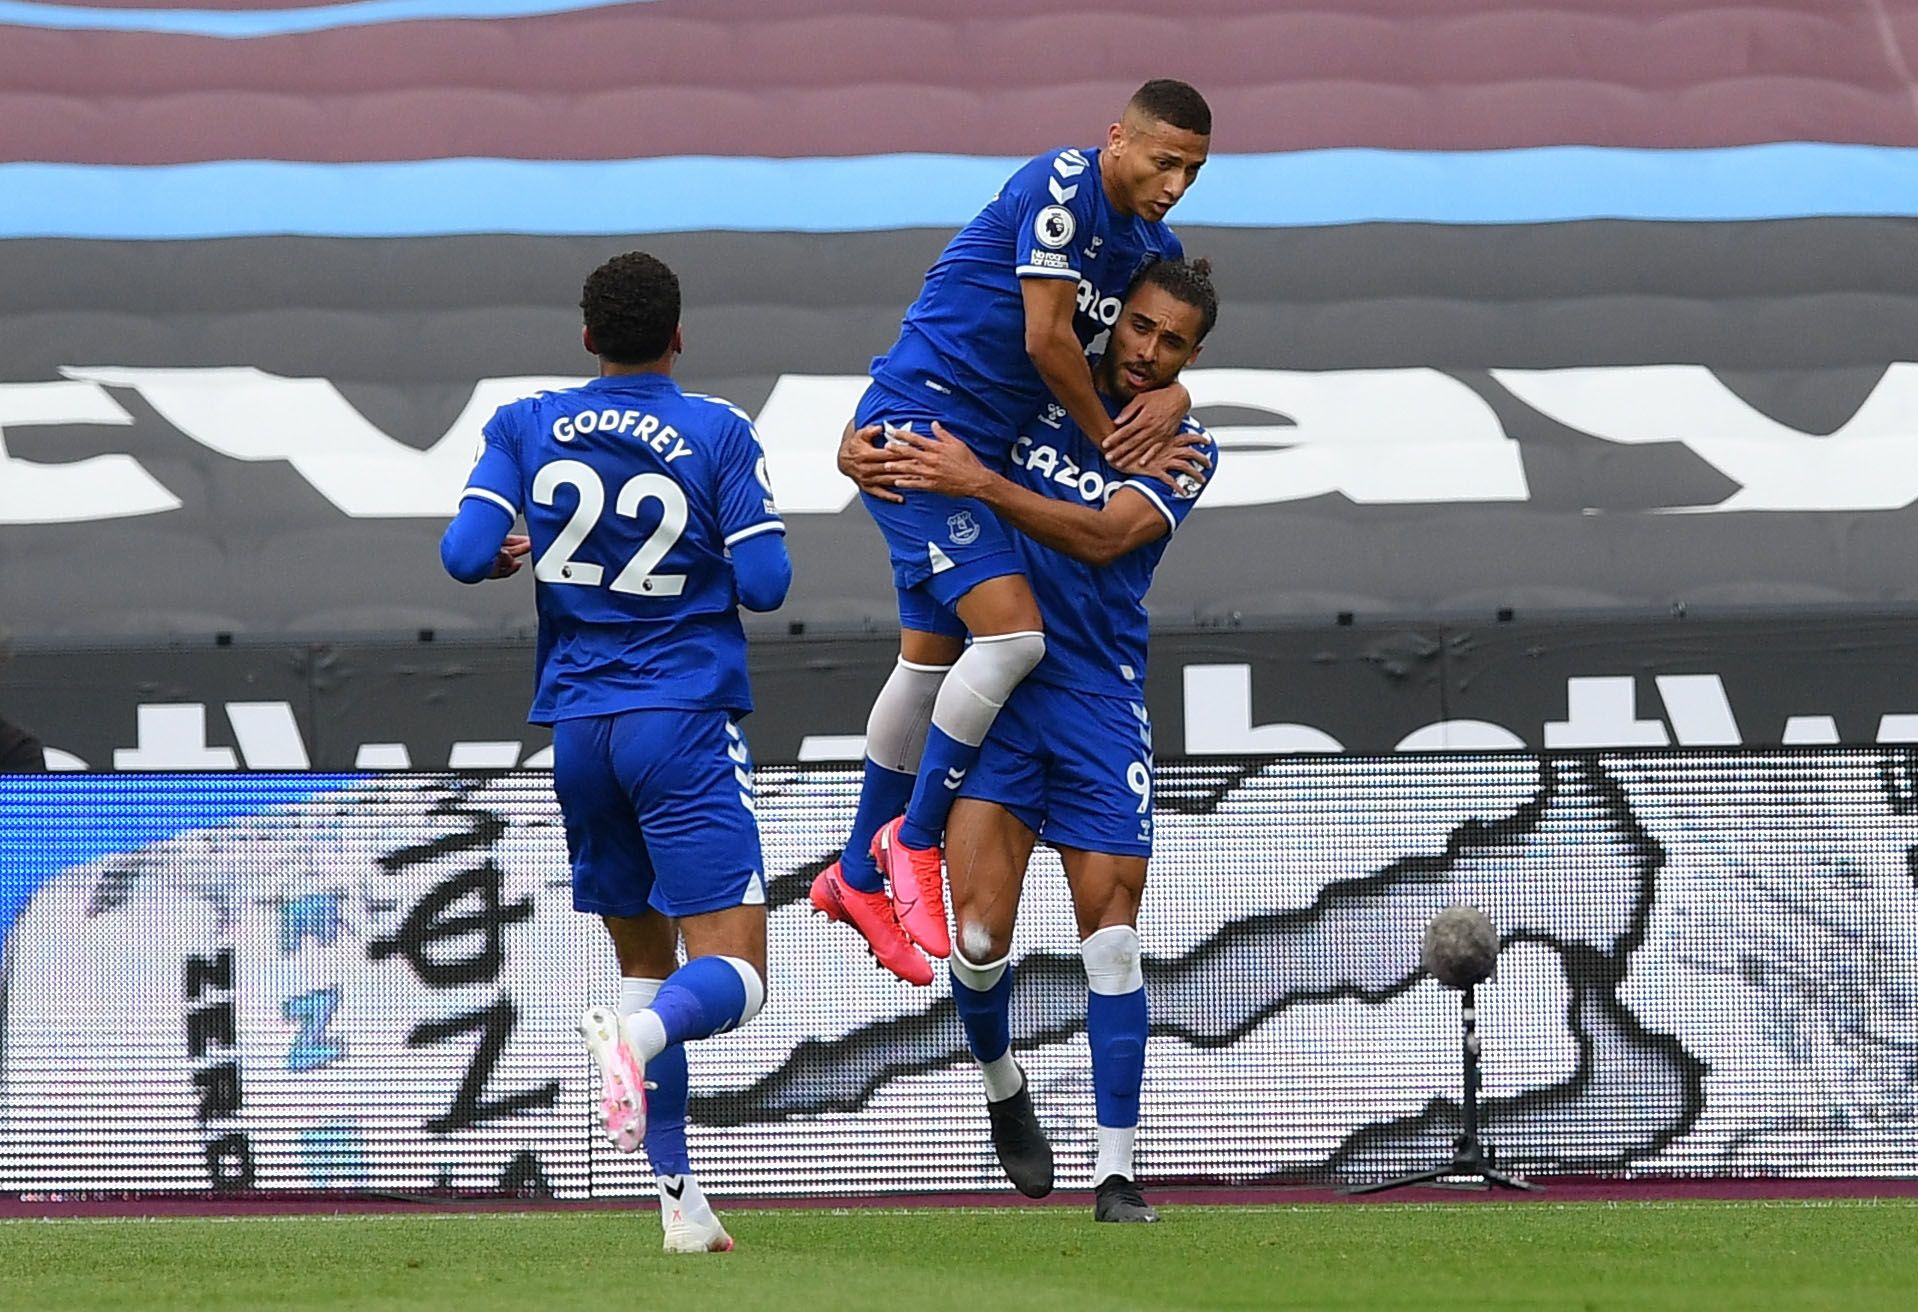 Soccer Football - Premier League - West Ham United v Everton - London Stadium, London, Britain - May 9, 2021 Everton's Dominic Calvert-Lewin celebrates scoring their first goal with Richarlison Pool via REUTERS/Justin Tallis EDITORIAL USE ONLY. No use with unauthorized audio, video, data, fixture lists, club/league logos or 'live' services. Online in-match use limited to 75 images, no video emulation. No use in betting, games or single club /league/player publications.  Please contact your accou